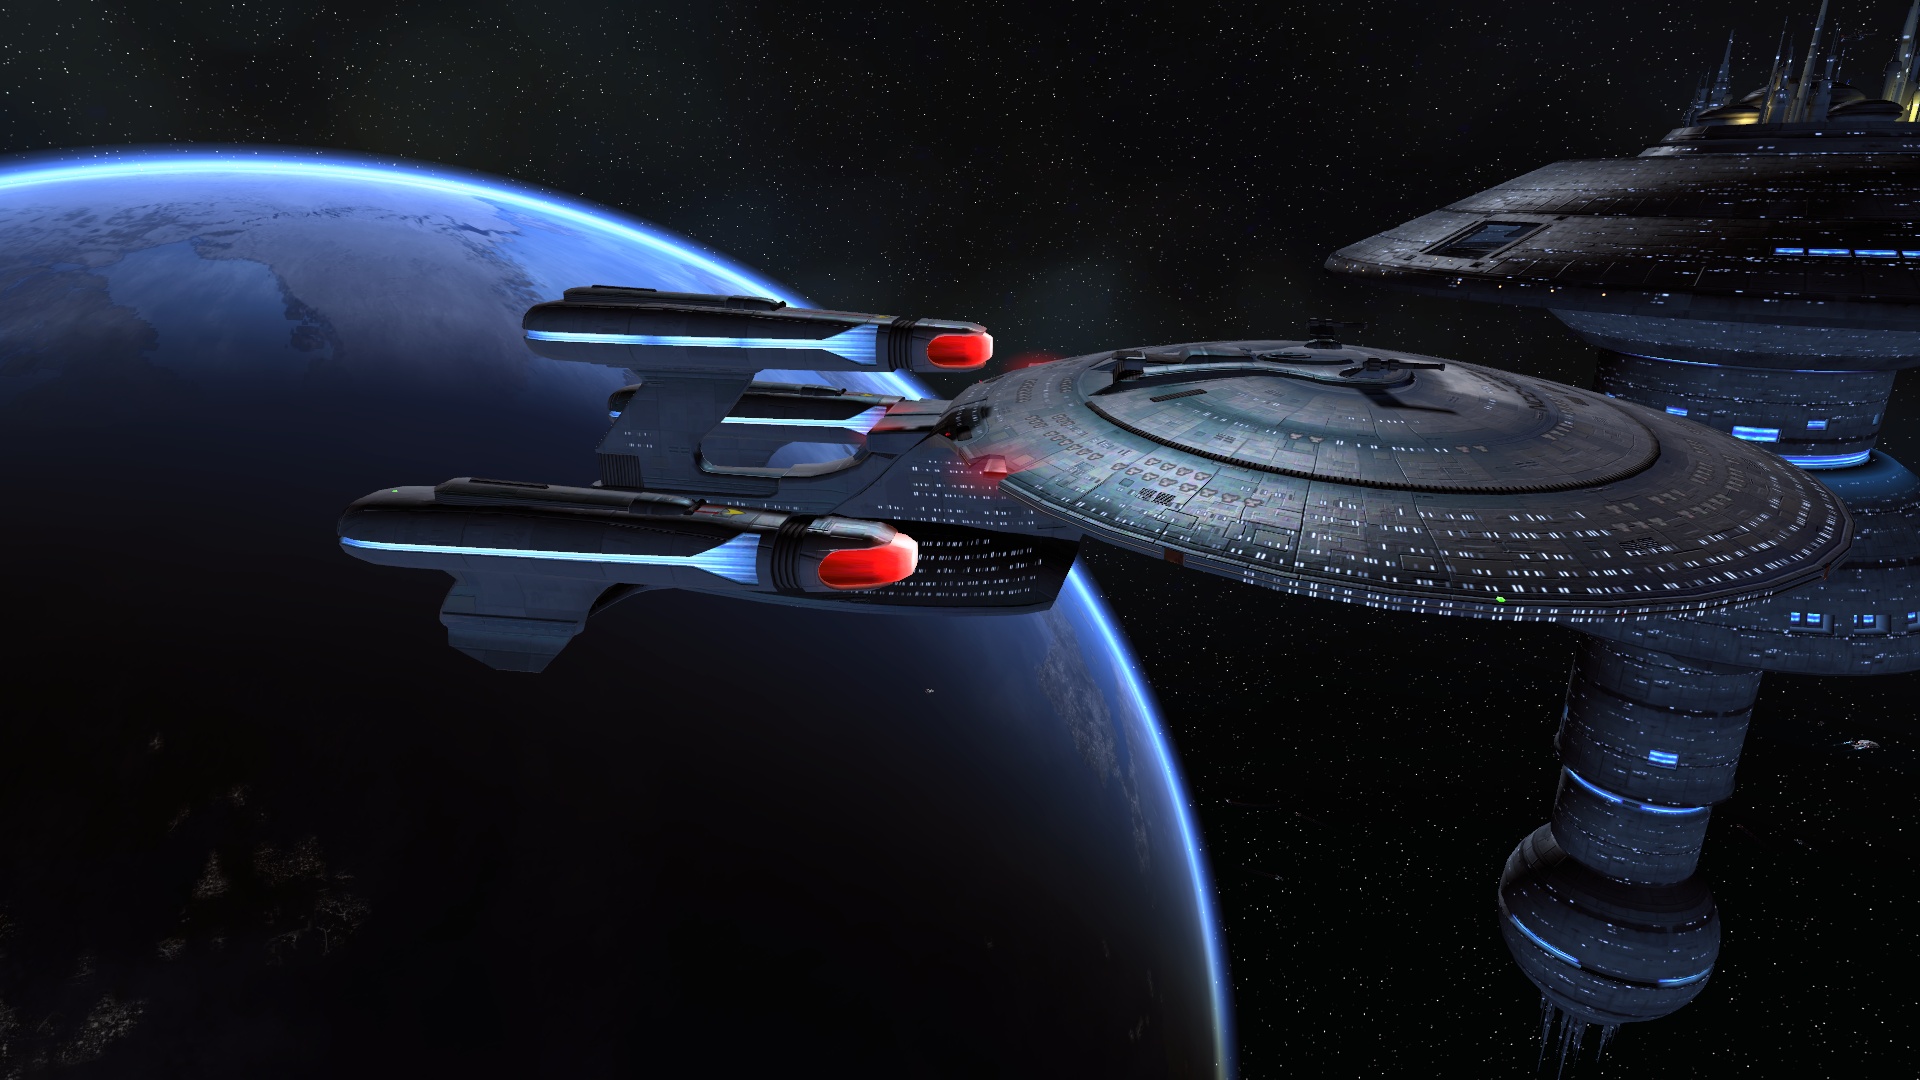 Dreadnought Cruiser Submitted By Usafedgar